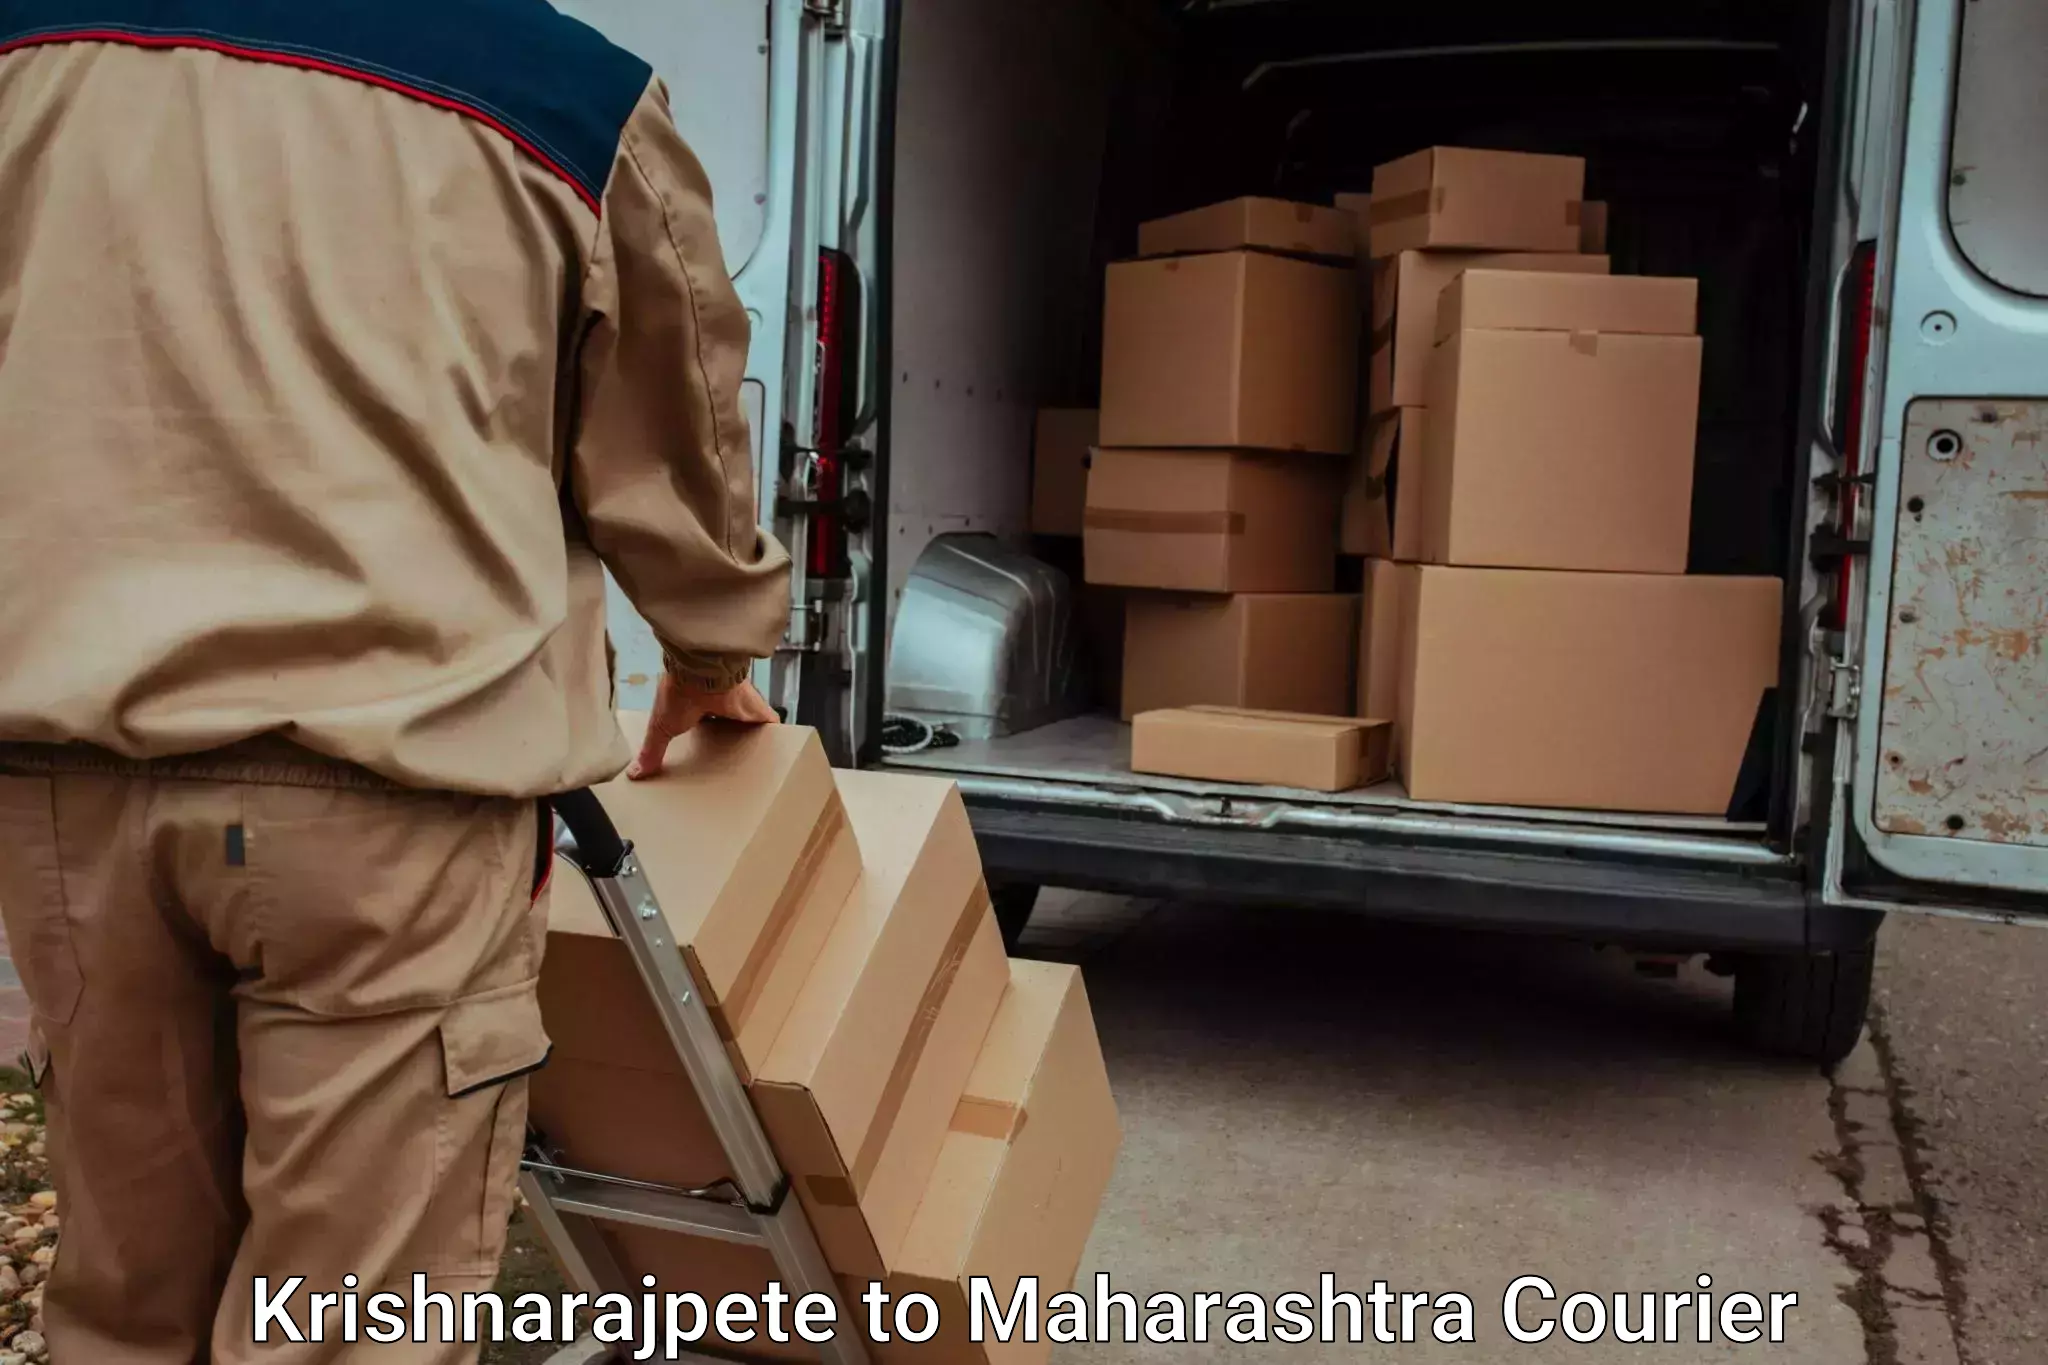 Express luggage delivery in Krishnarajpete to Sangameshwar